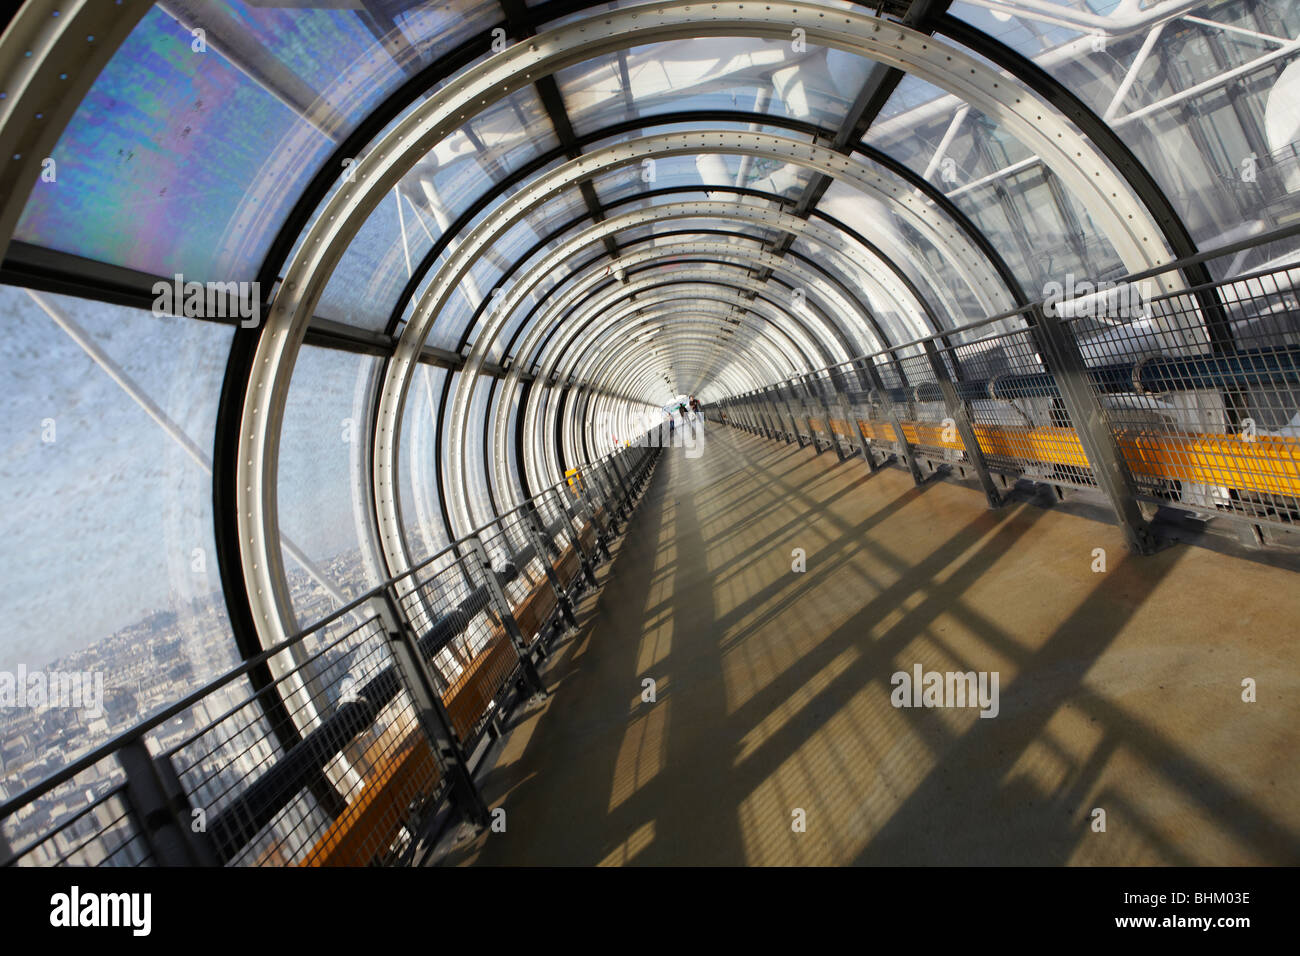 Detail of the Centre Pompidou panoramic viewing tunnel, Paris, France Stock Photo